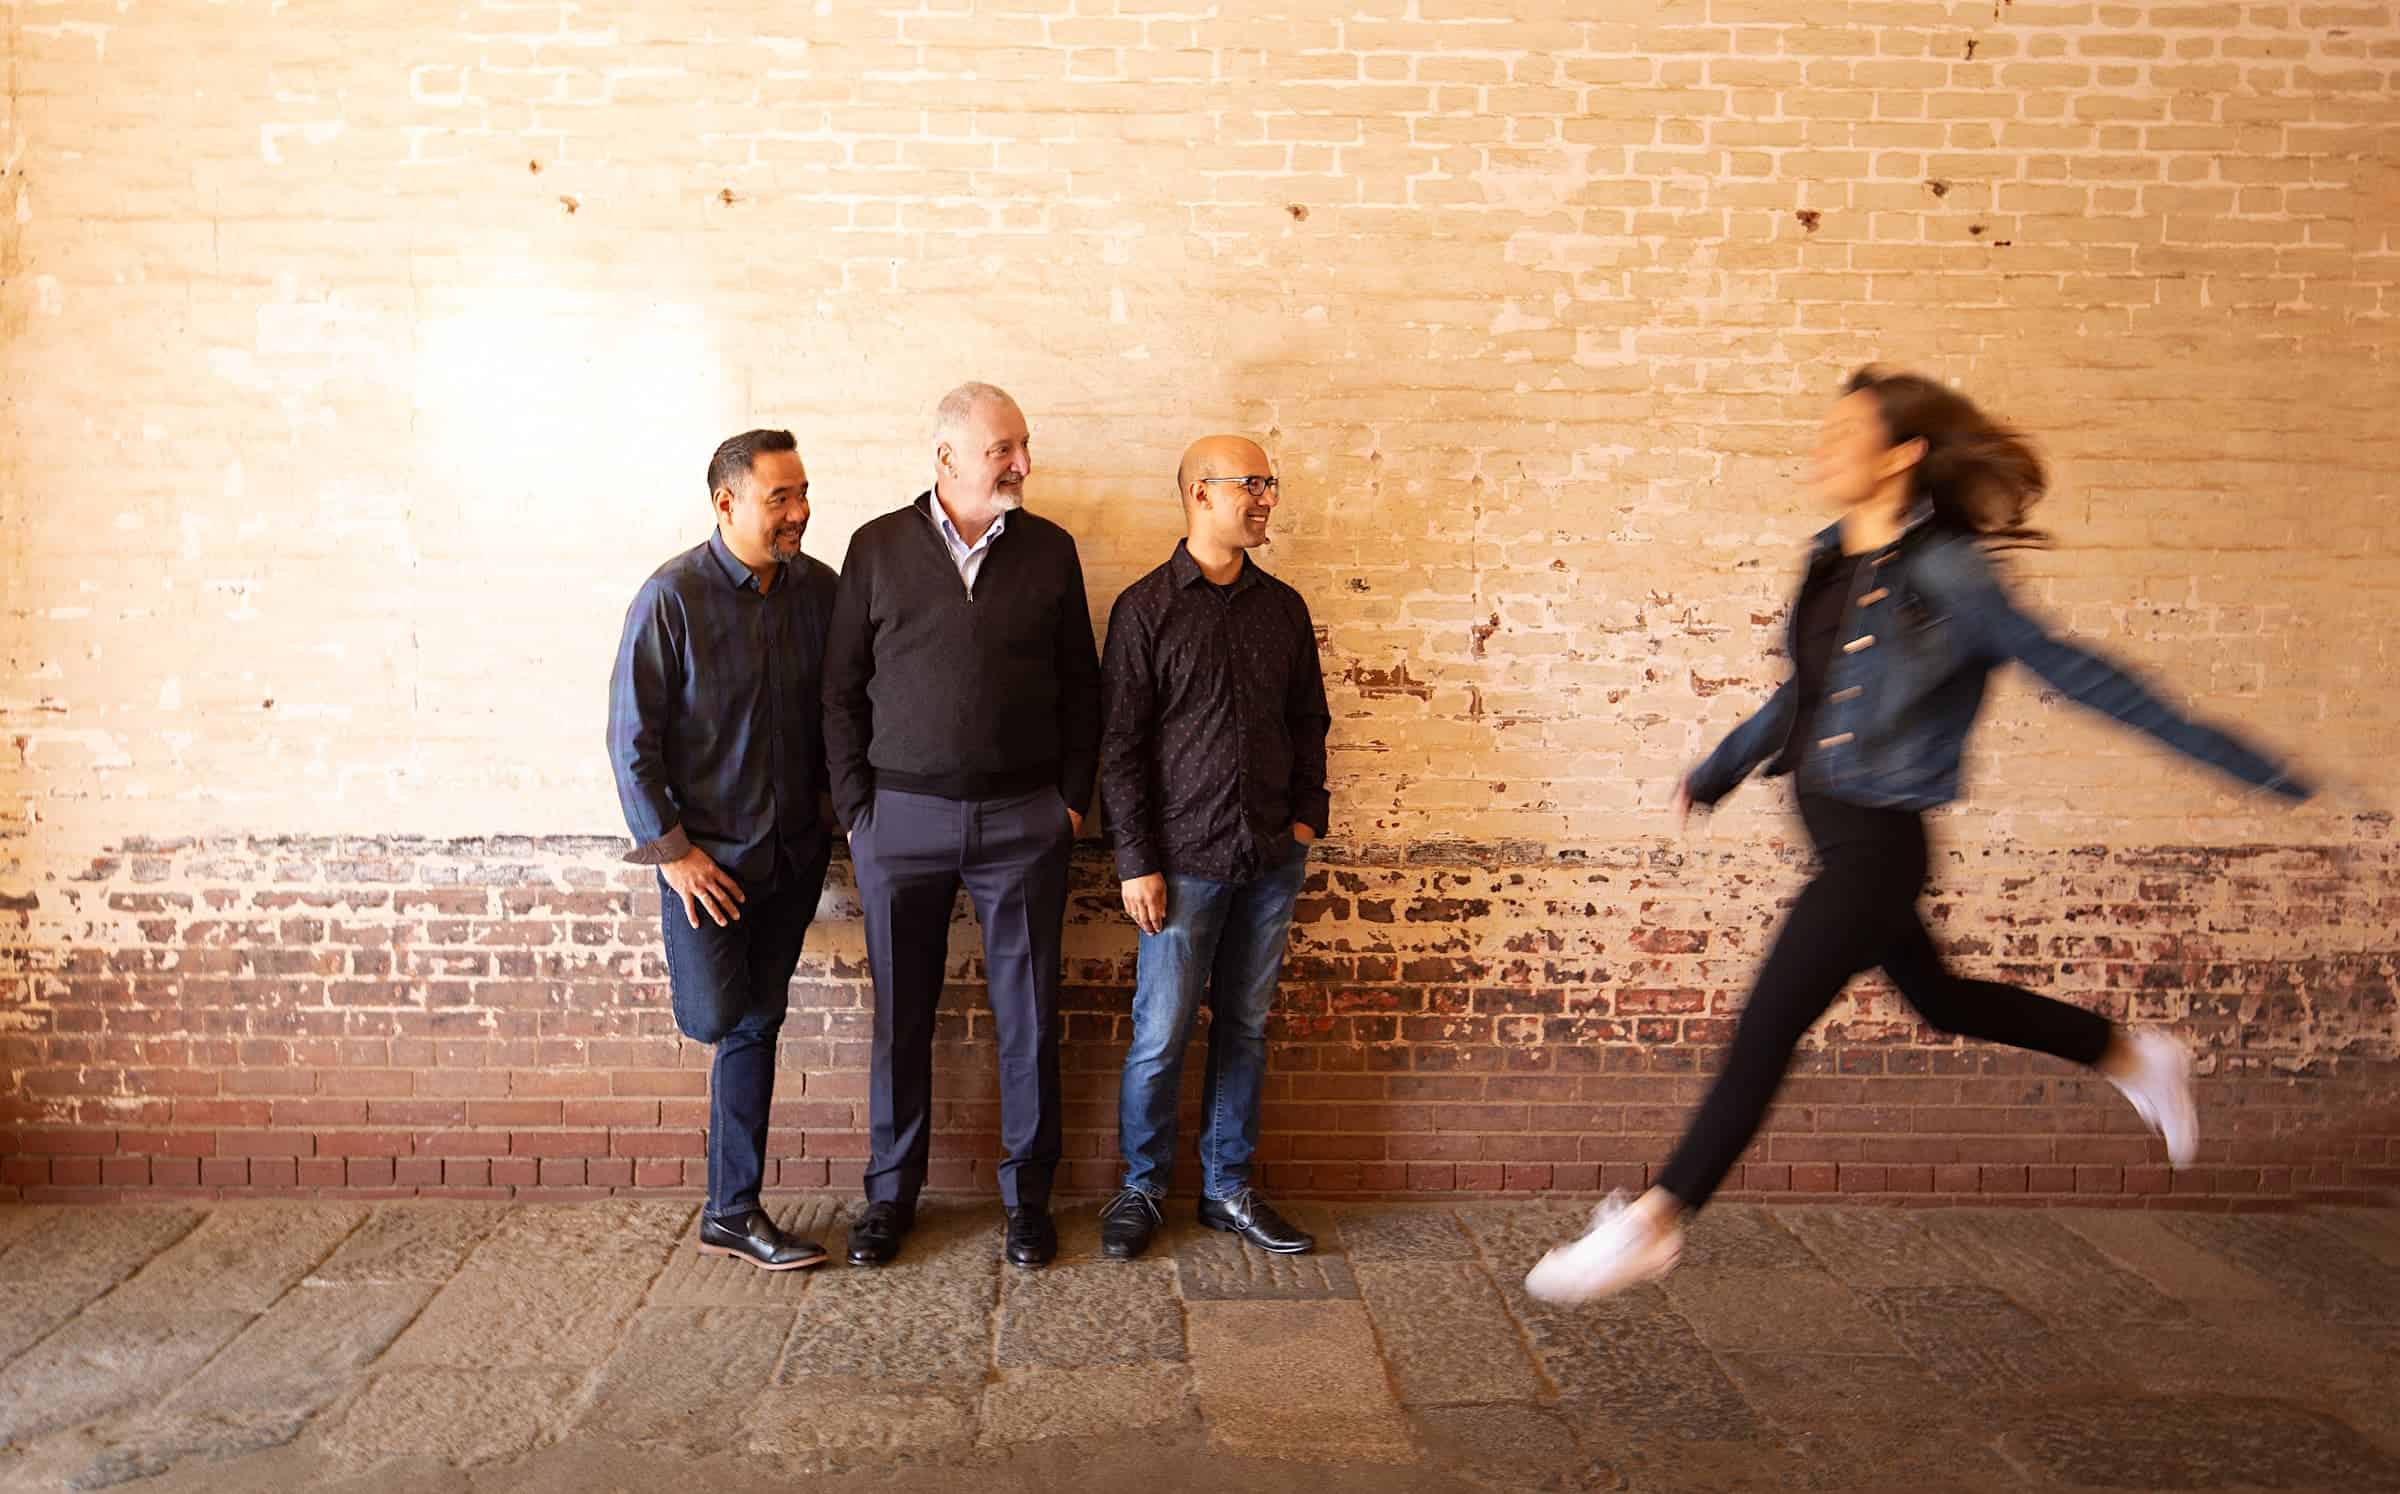 Yuna Lee Jumping into the frame with Zakarias Grafilo, Sandy Wilson, and David Samuel looking on against a wall